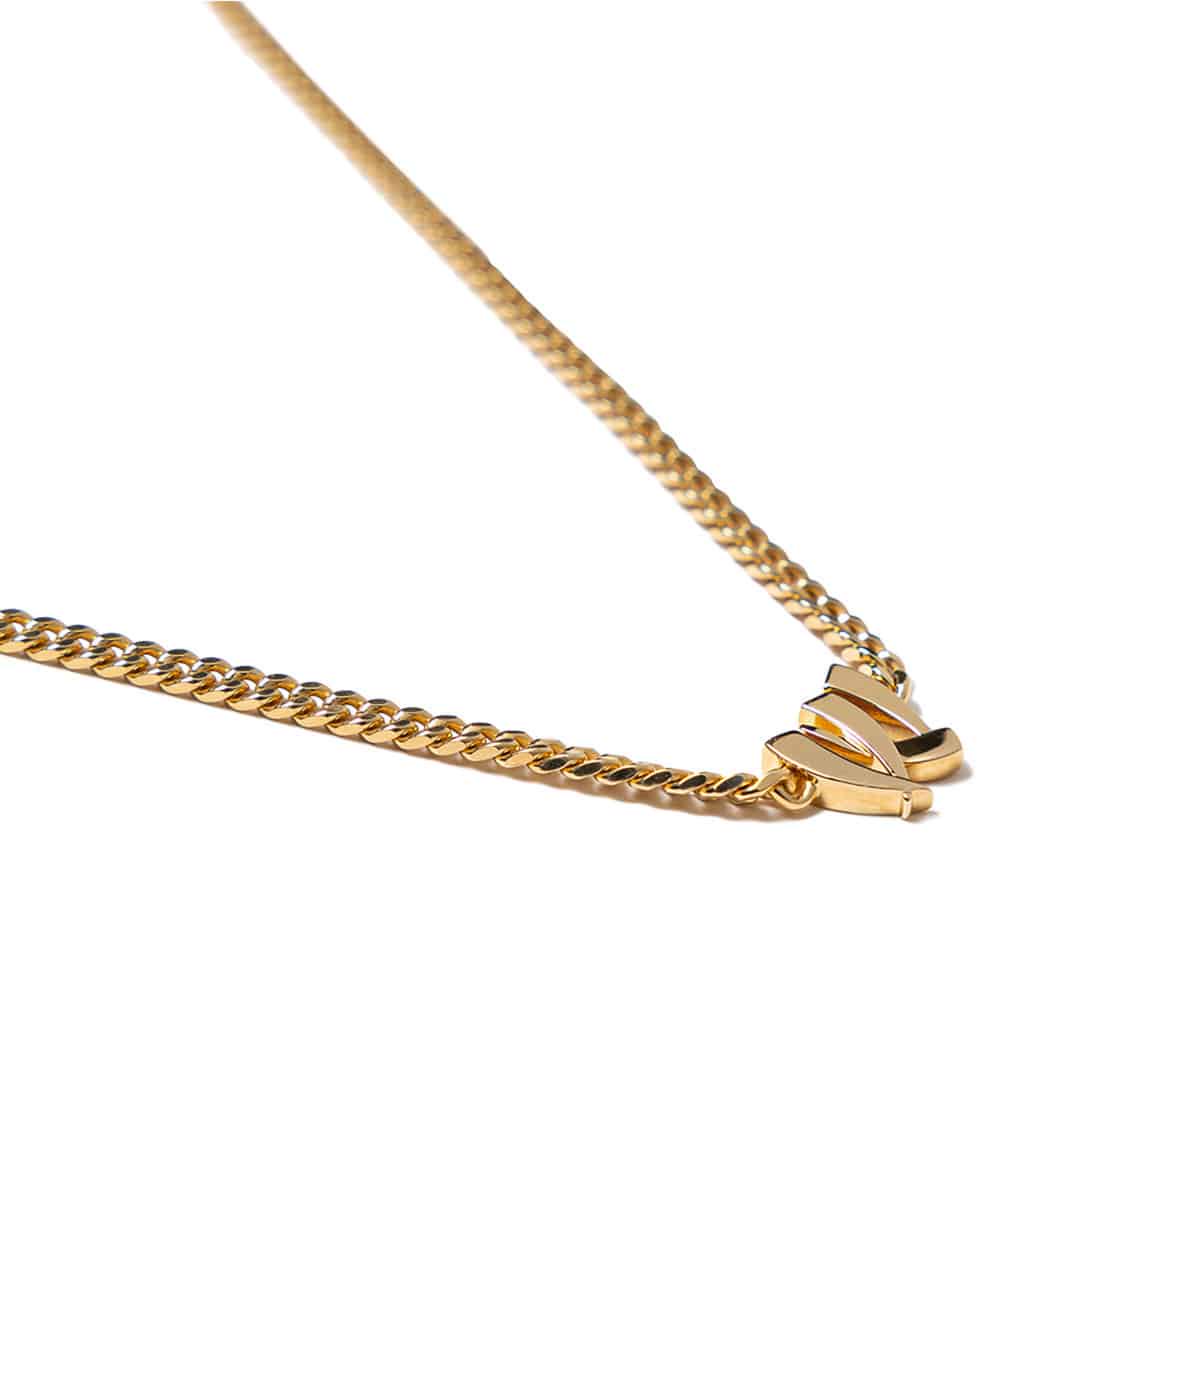 CANAL / NECKLACE / SILVER. K18GP | WTAPS(ダブルタップス